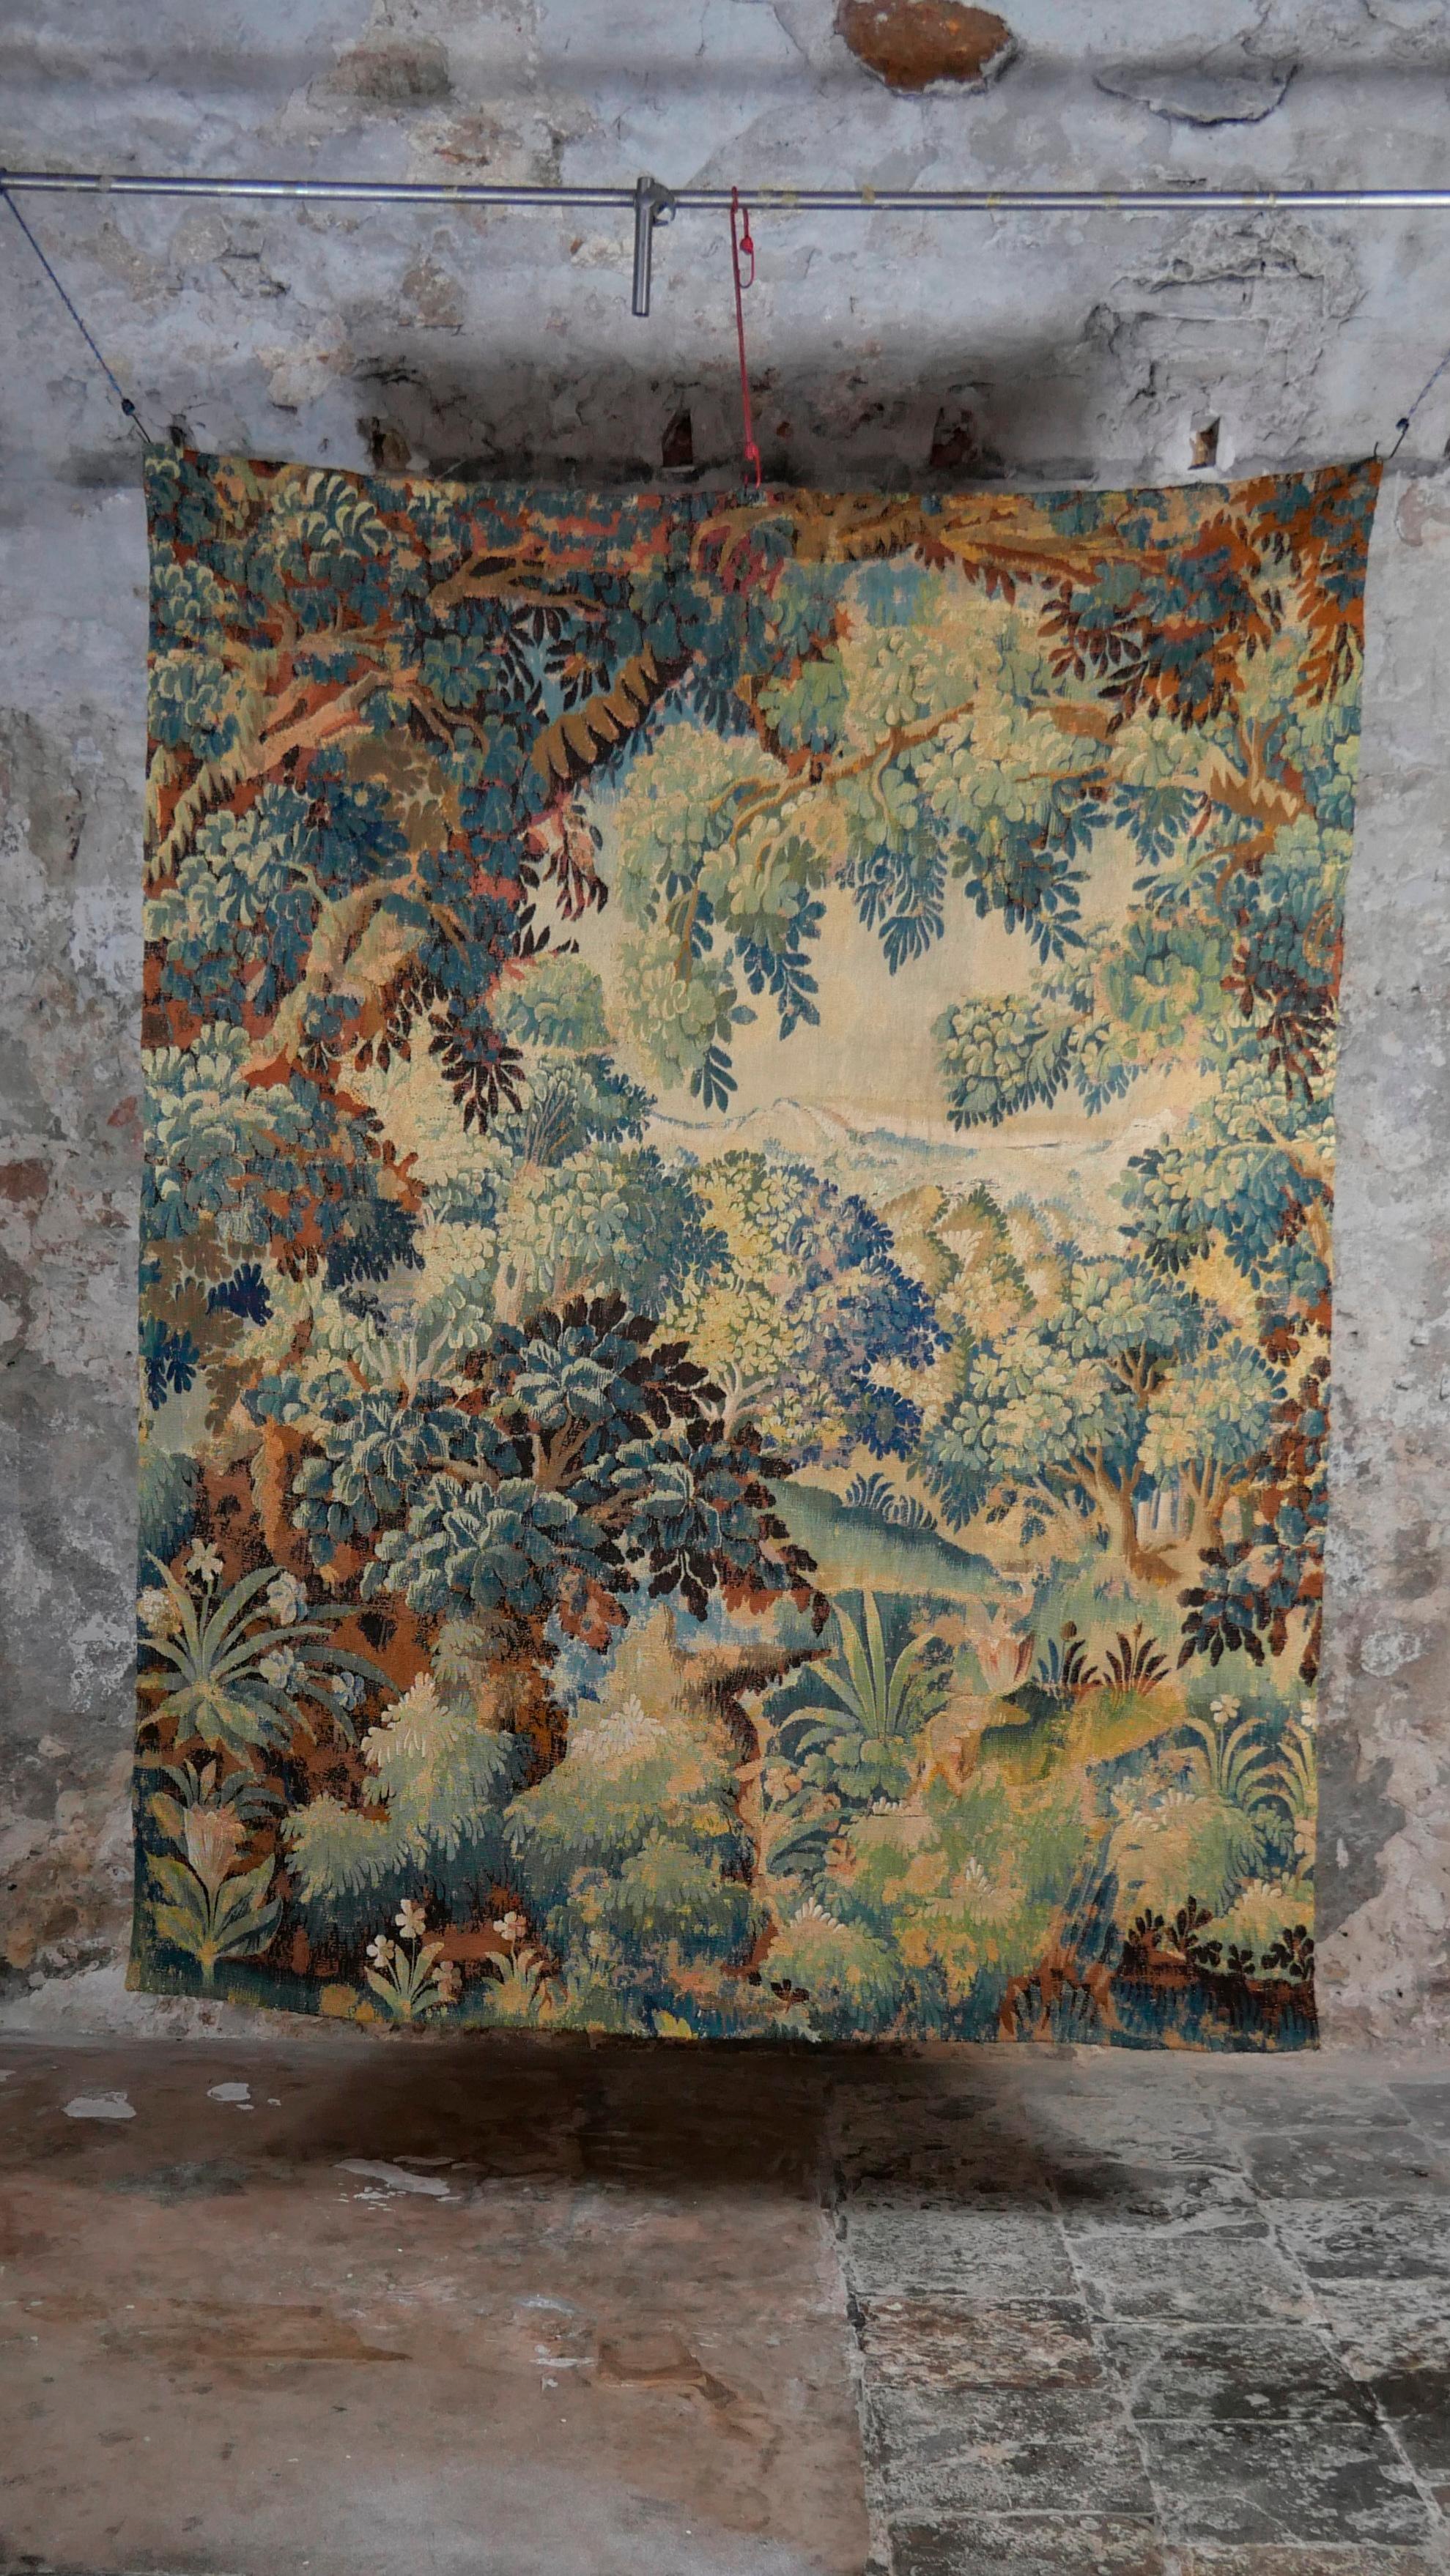 This particular tapestry is a Verdure Aubusson circa 1780 / 1790. ‘Verdure’ (foliage) tapestries were woven throughout the 17th and 18th Centuries, featuring wooded landscapes, reflecting the interest in botanical themes during this